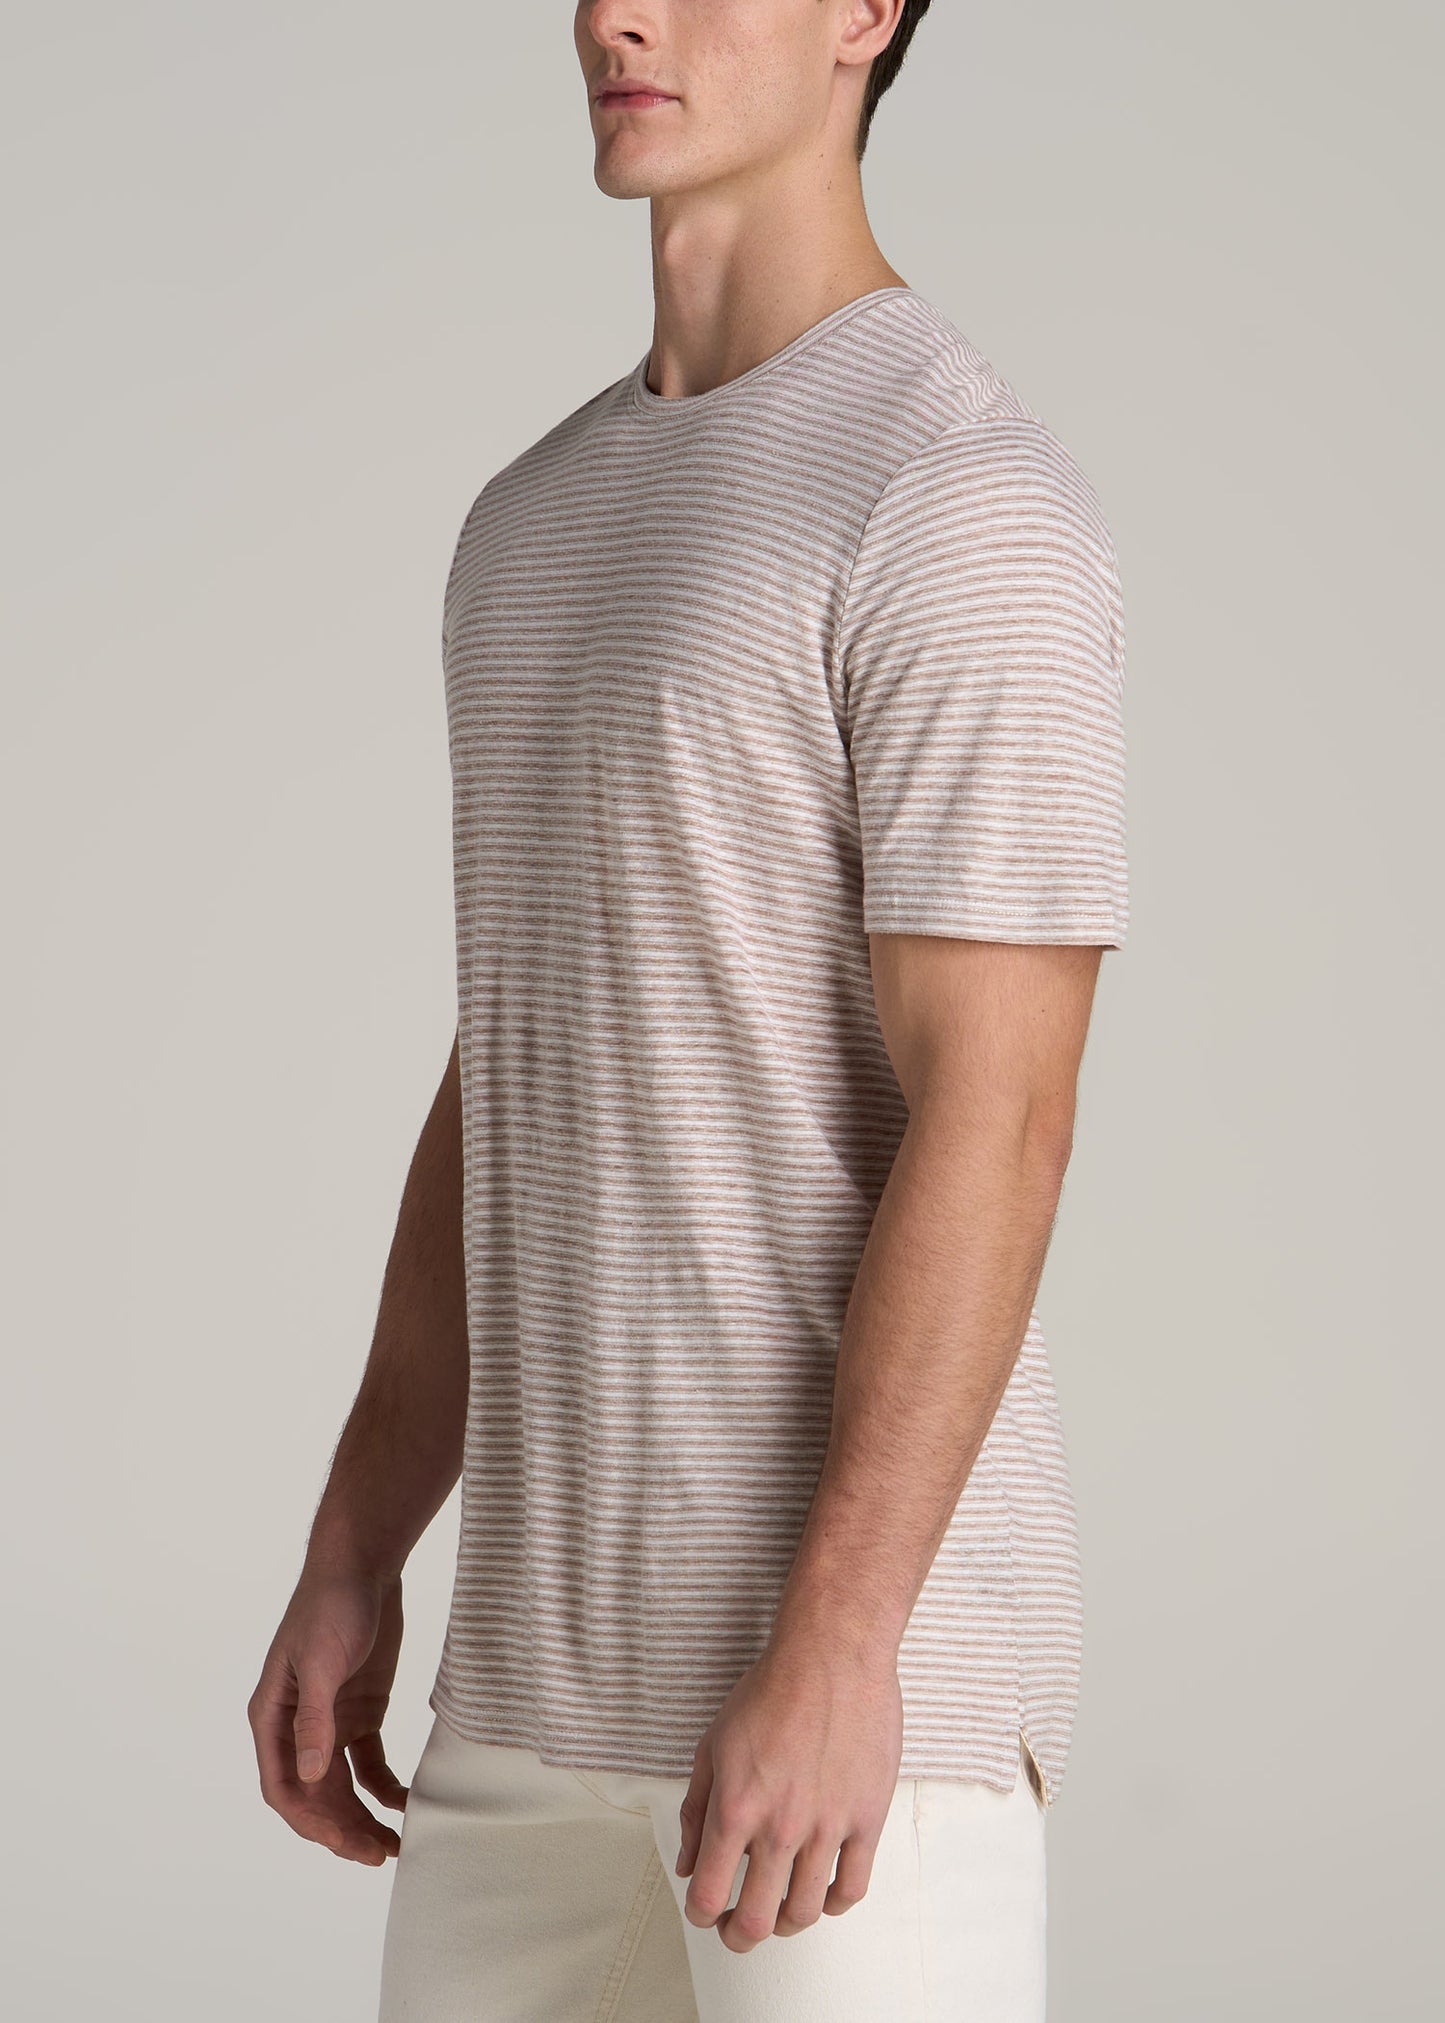 Linen Crewneck T-Shirt for Tall Men in Beige and White Stripe